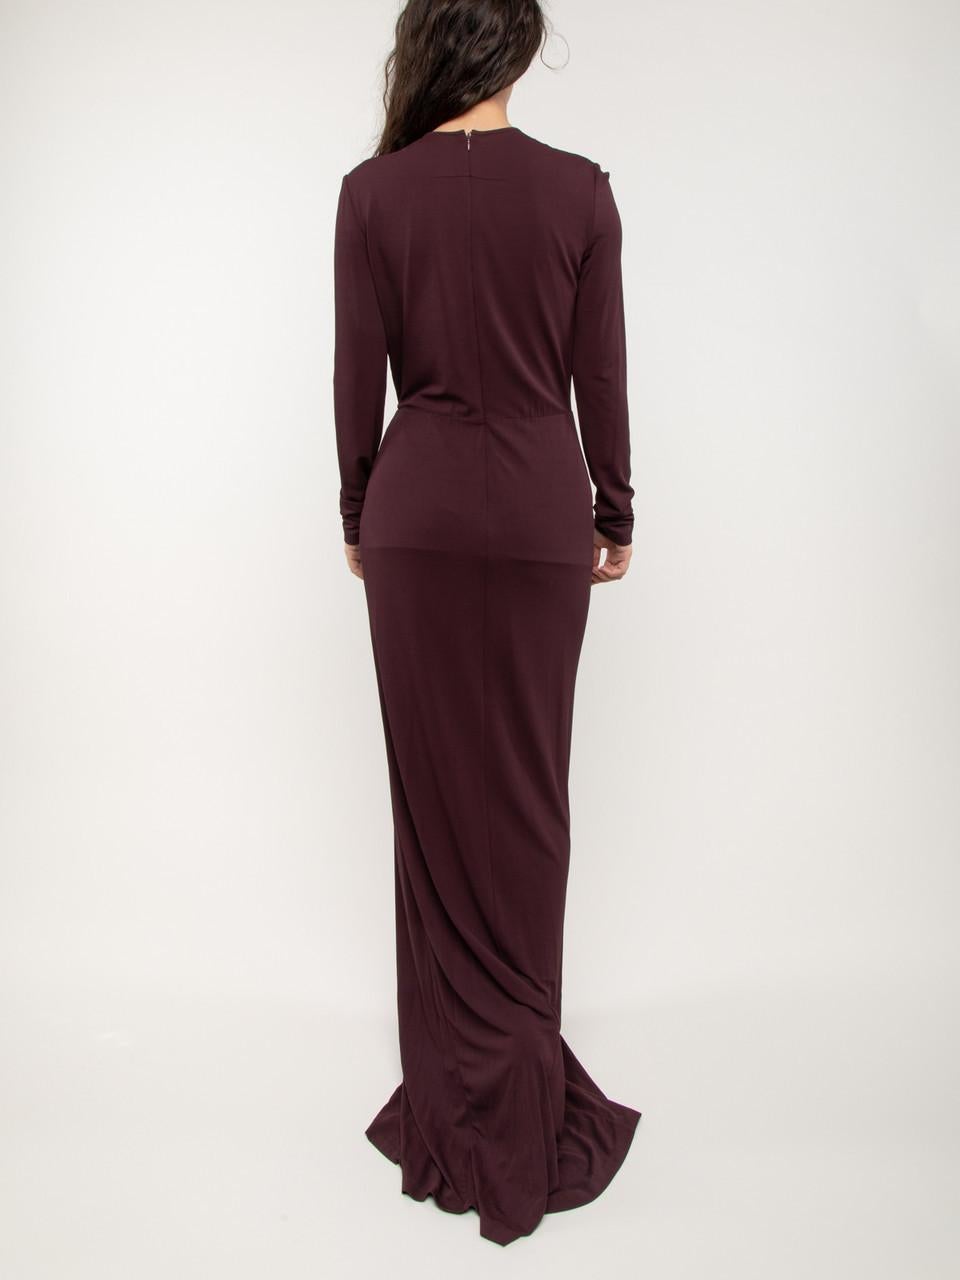 Pre-Loved Givenchy Women's Purple Stretchy Maxi Dress 1